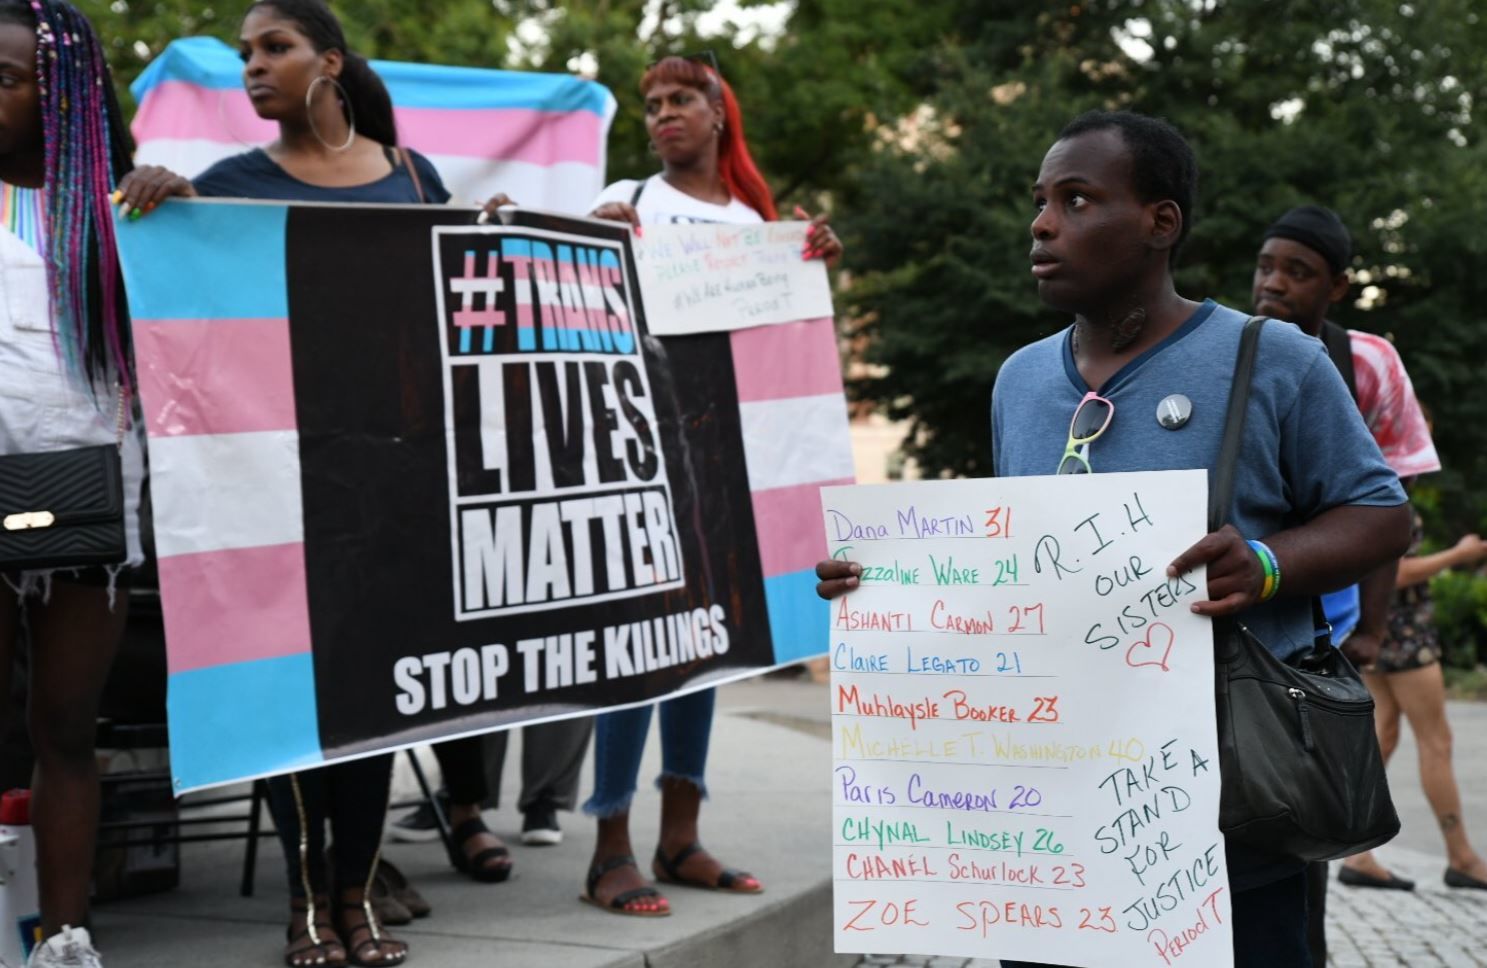 Supporters chant "Trans lives matter" during a vigil on Friday, June 21, 2019 in Dupont Circle. (WTOP/Alejandro Alvarez)